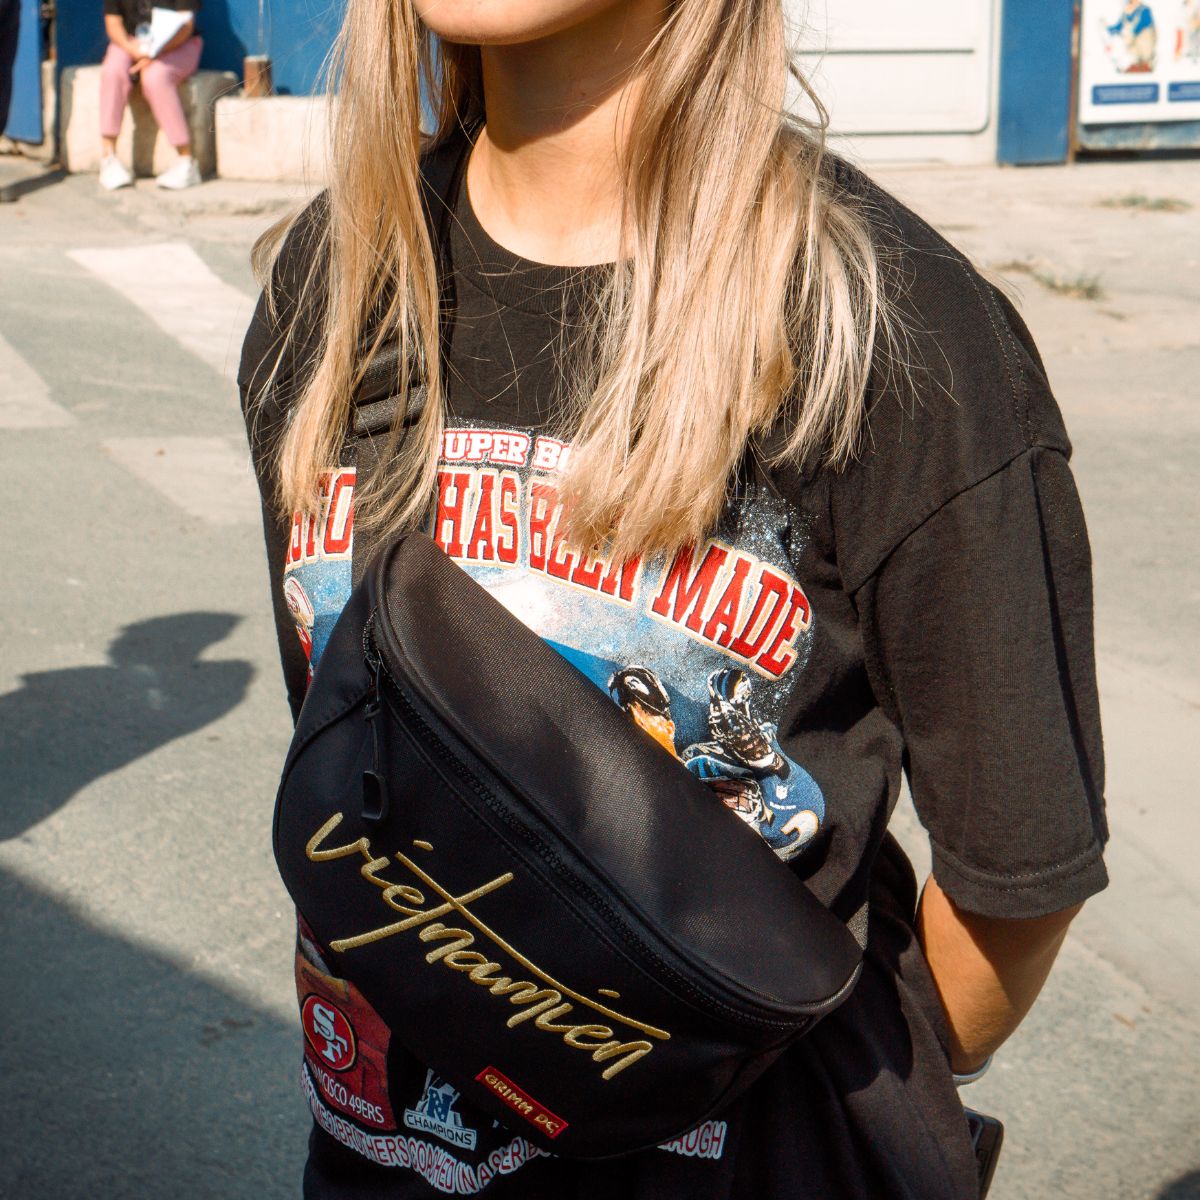 Girl wearing a graphic tee with a belt bag across her chest